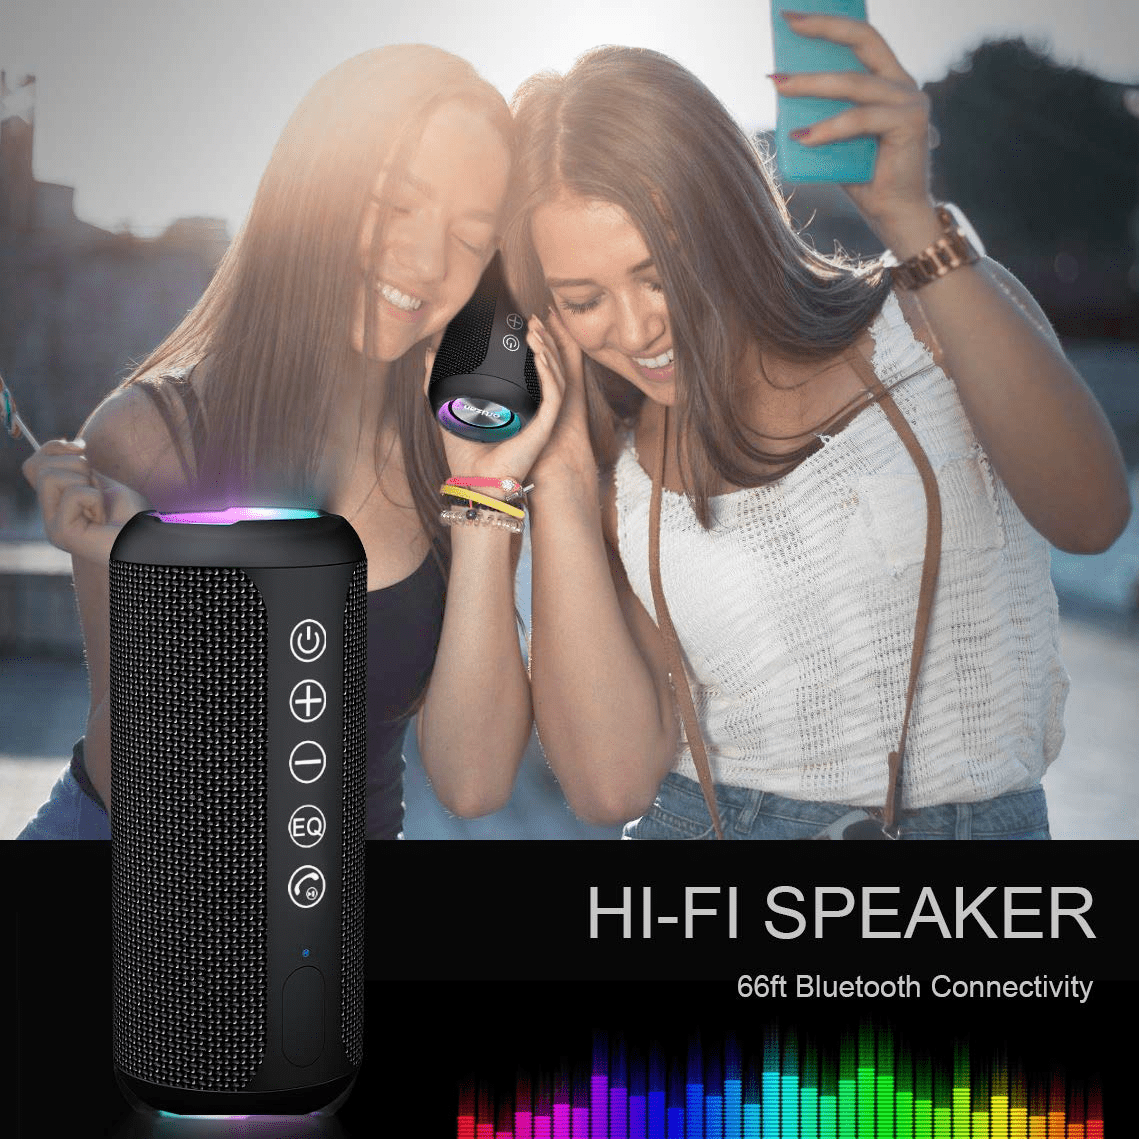 Extra Bass Speaker Bluetooth for Home 30H Playtime Outdoor IPX7 Waterproof Speakers Travel Ortizan Bluetooth Speaker Upgraded Portable Wireless Speaker with 24W Loud Stereo Sound and LED Light 